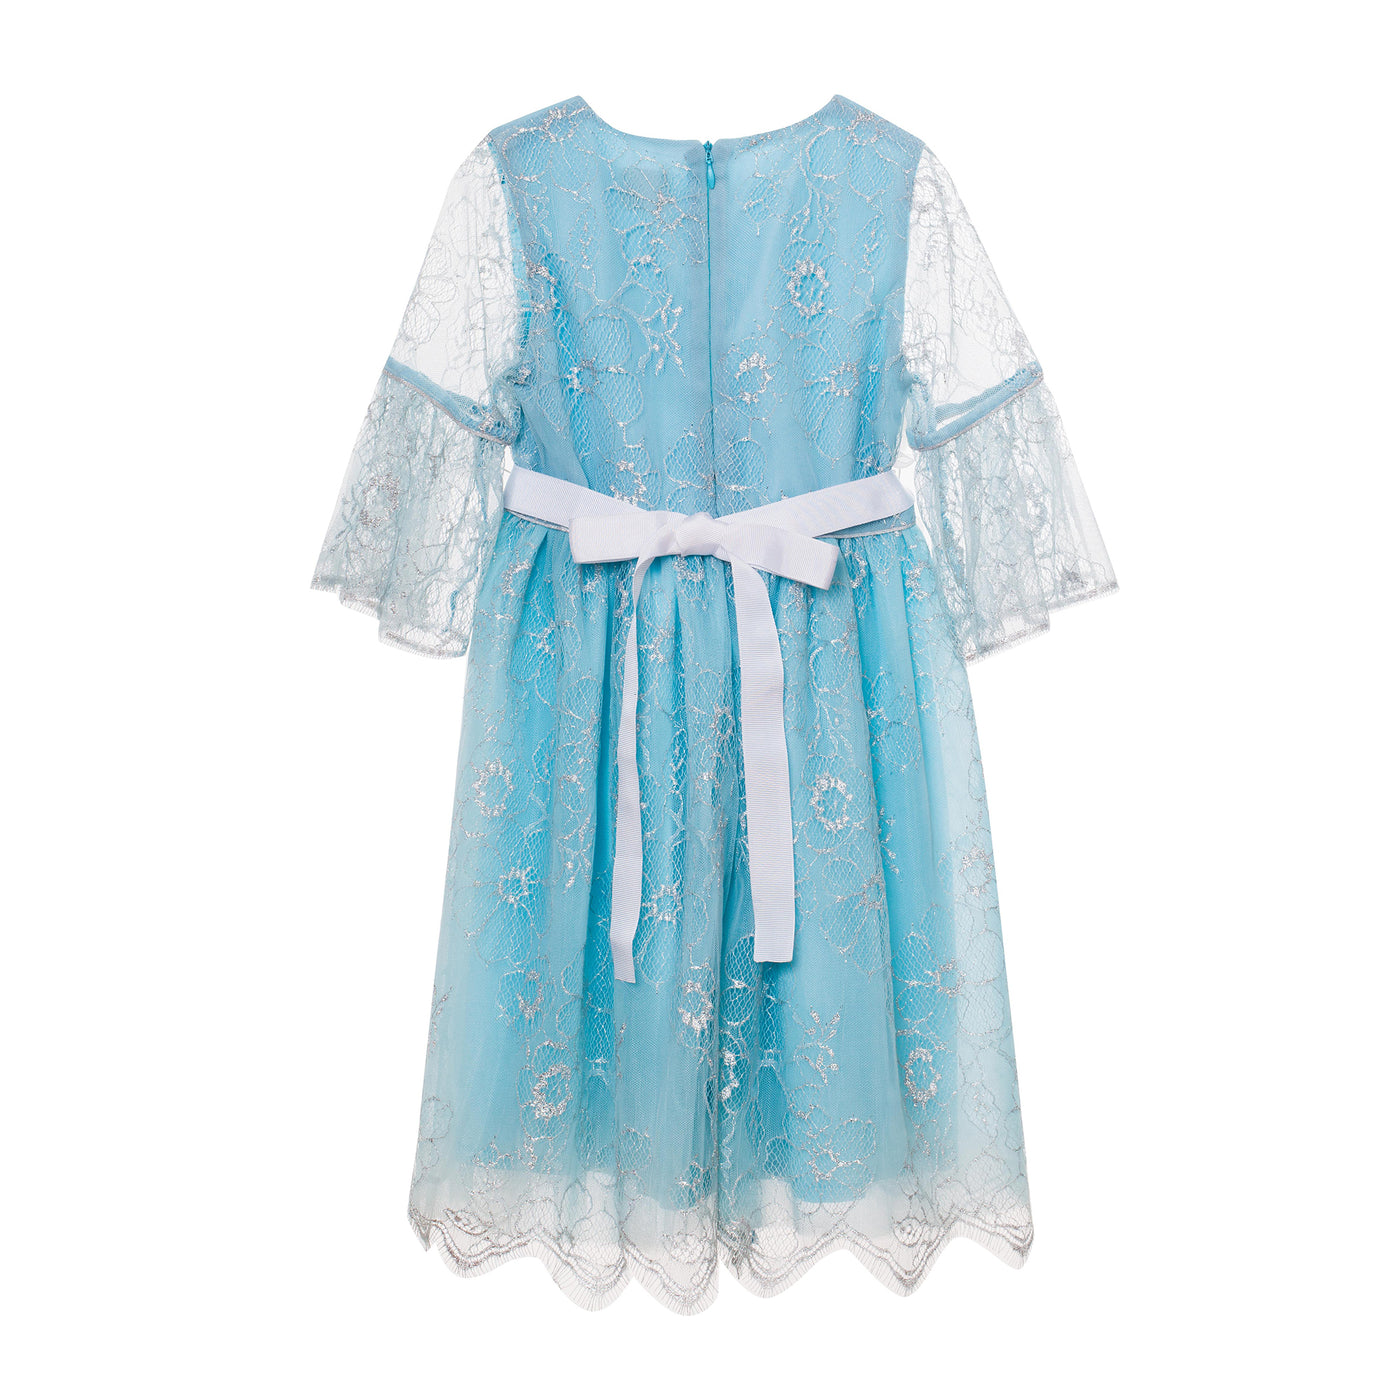 Baby blue and silver lace dress with white flower